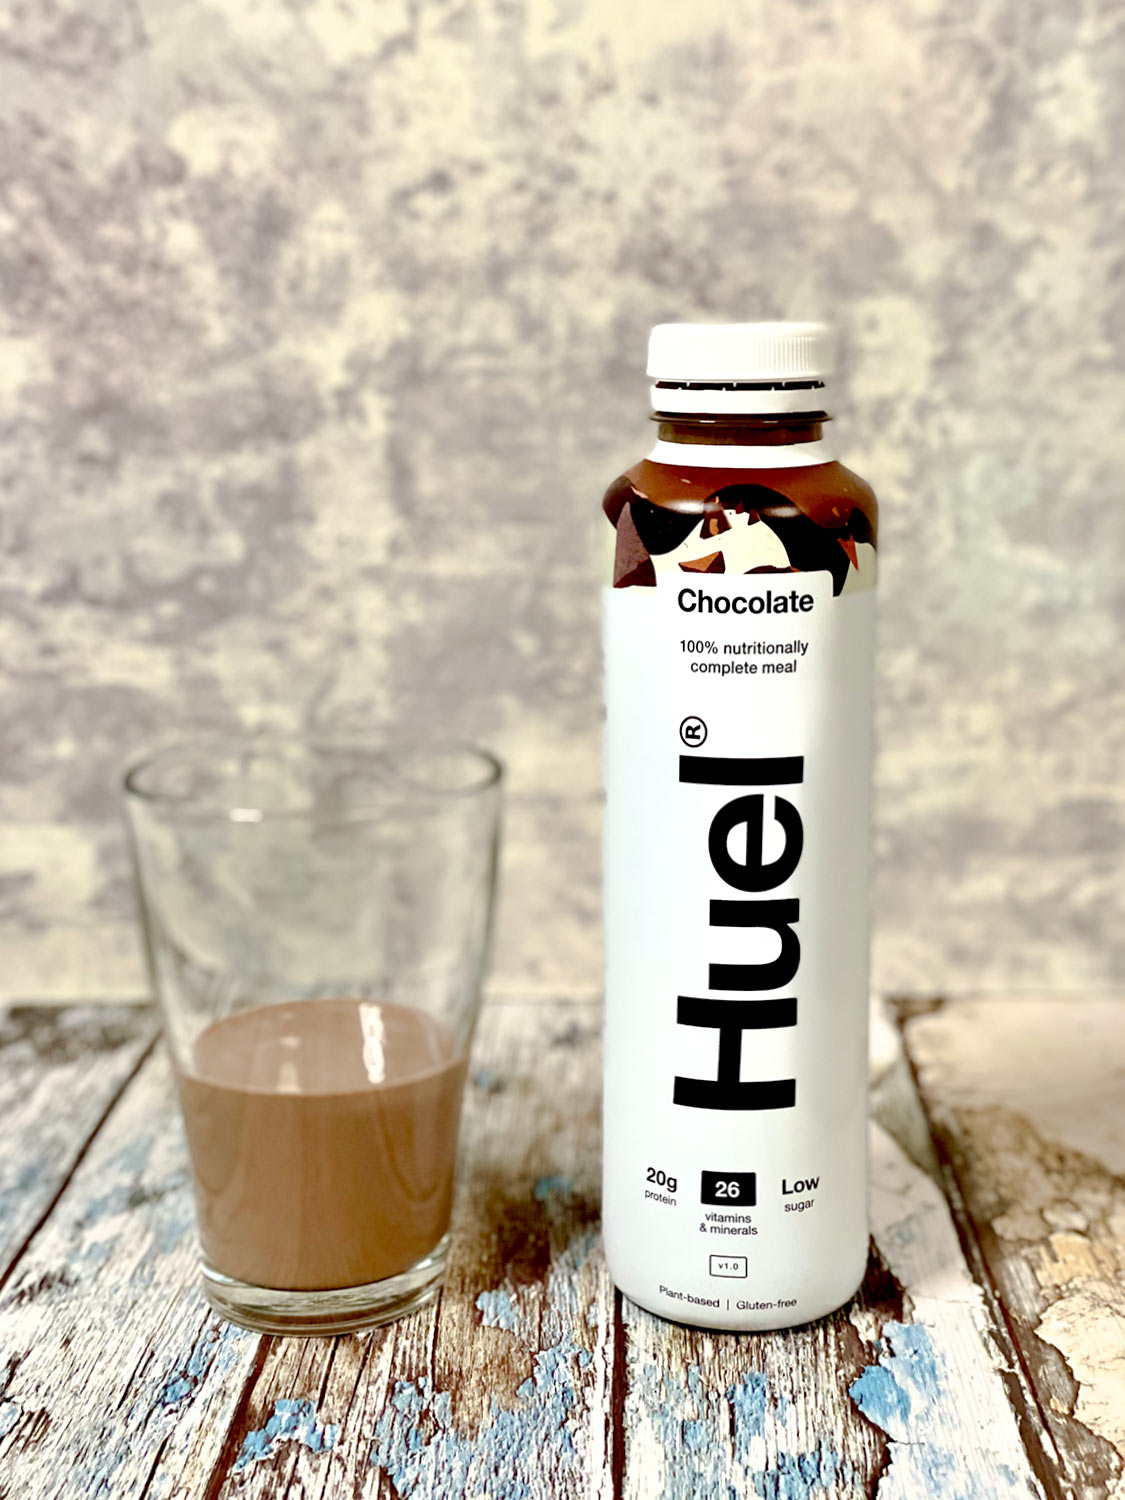 Huel Ready to Drink Chocolate Flavour Voucher Code Huel